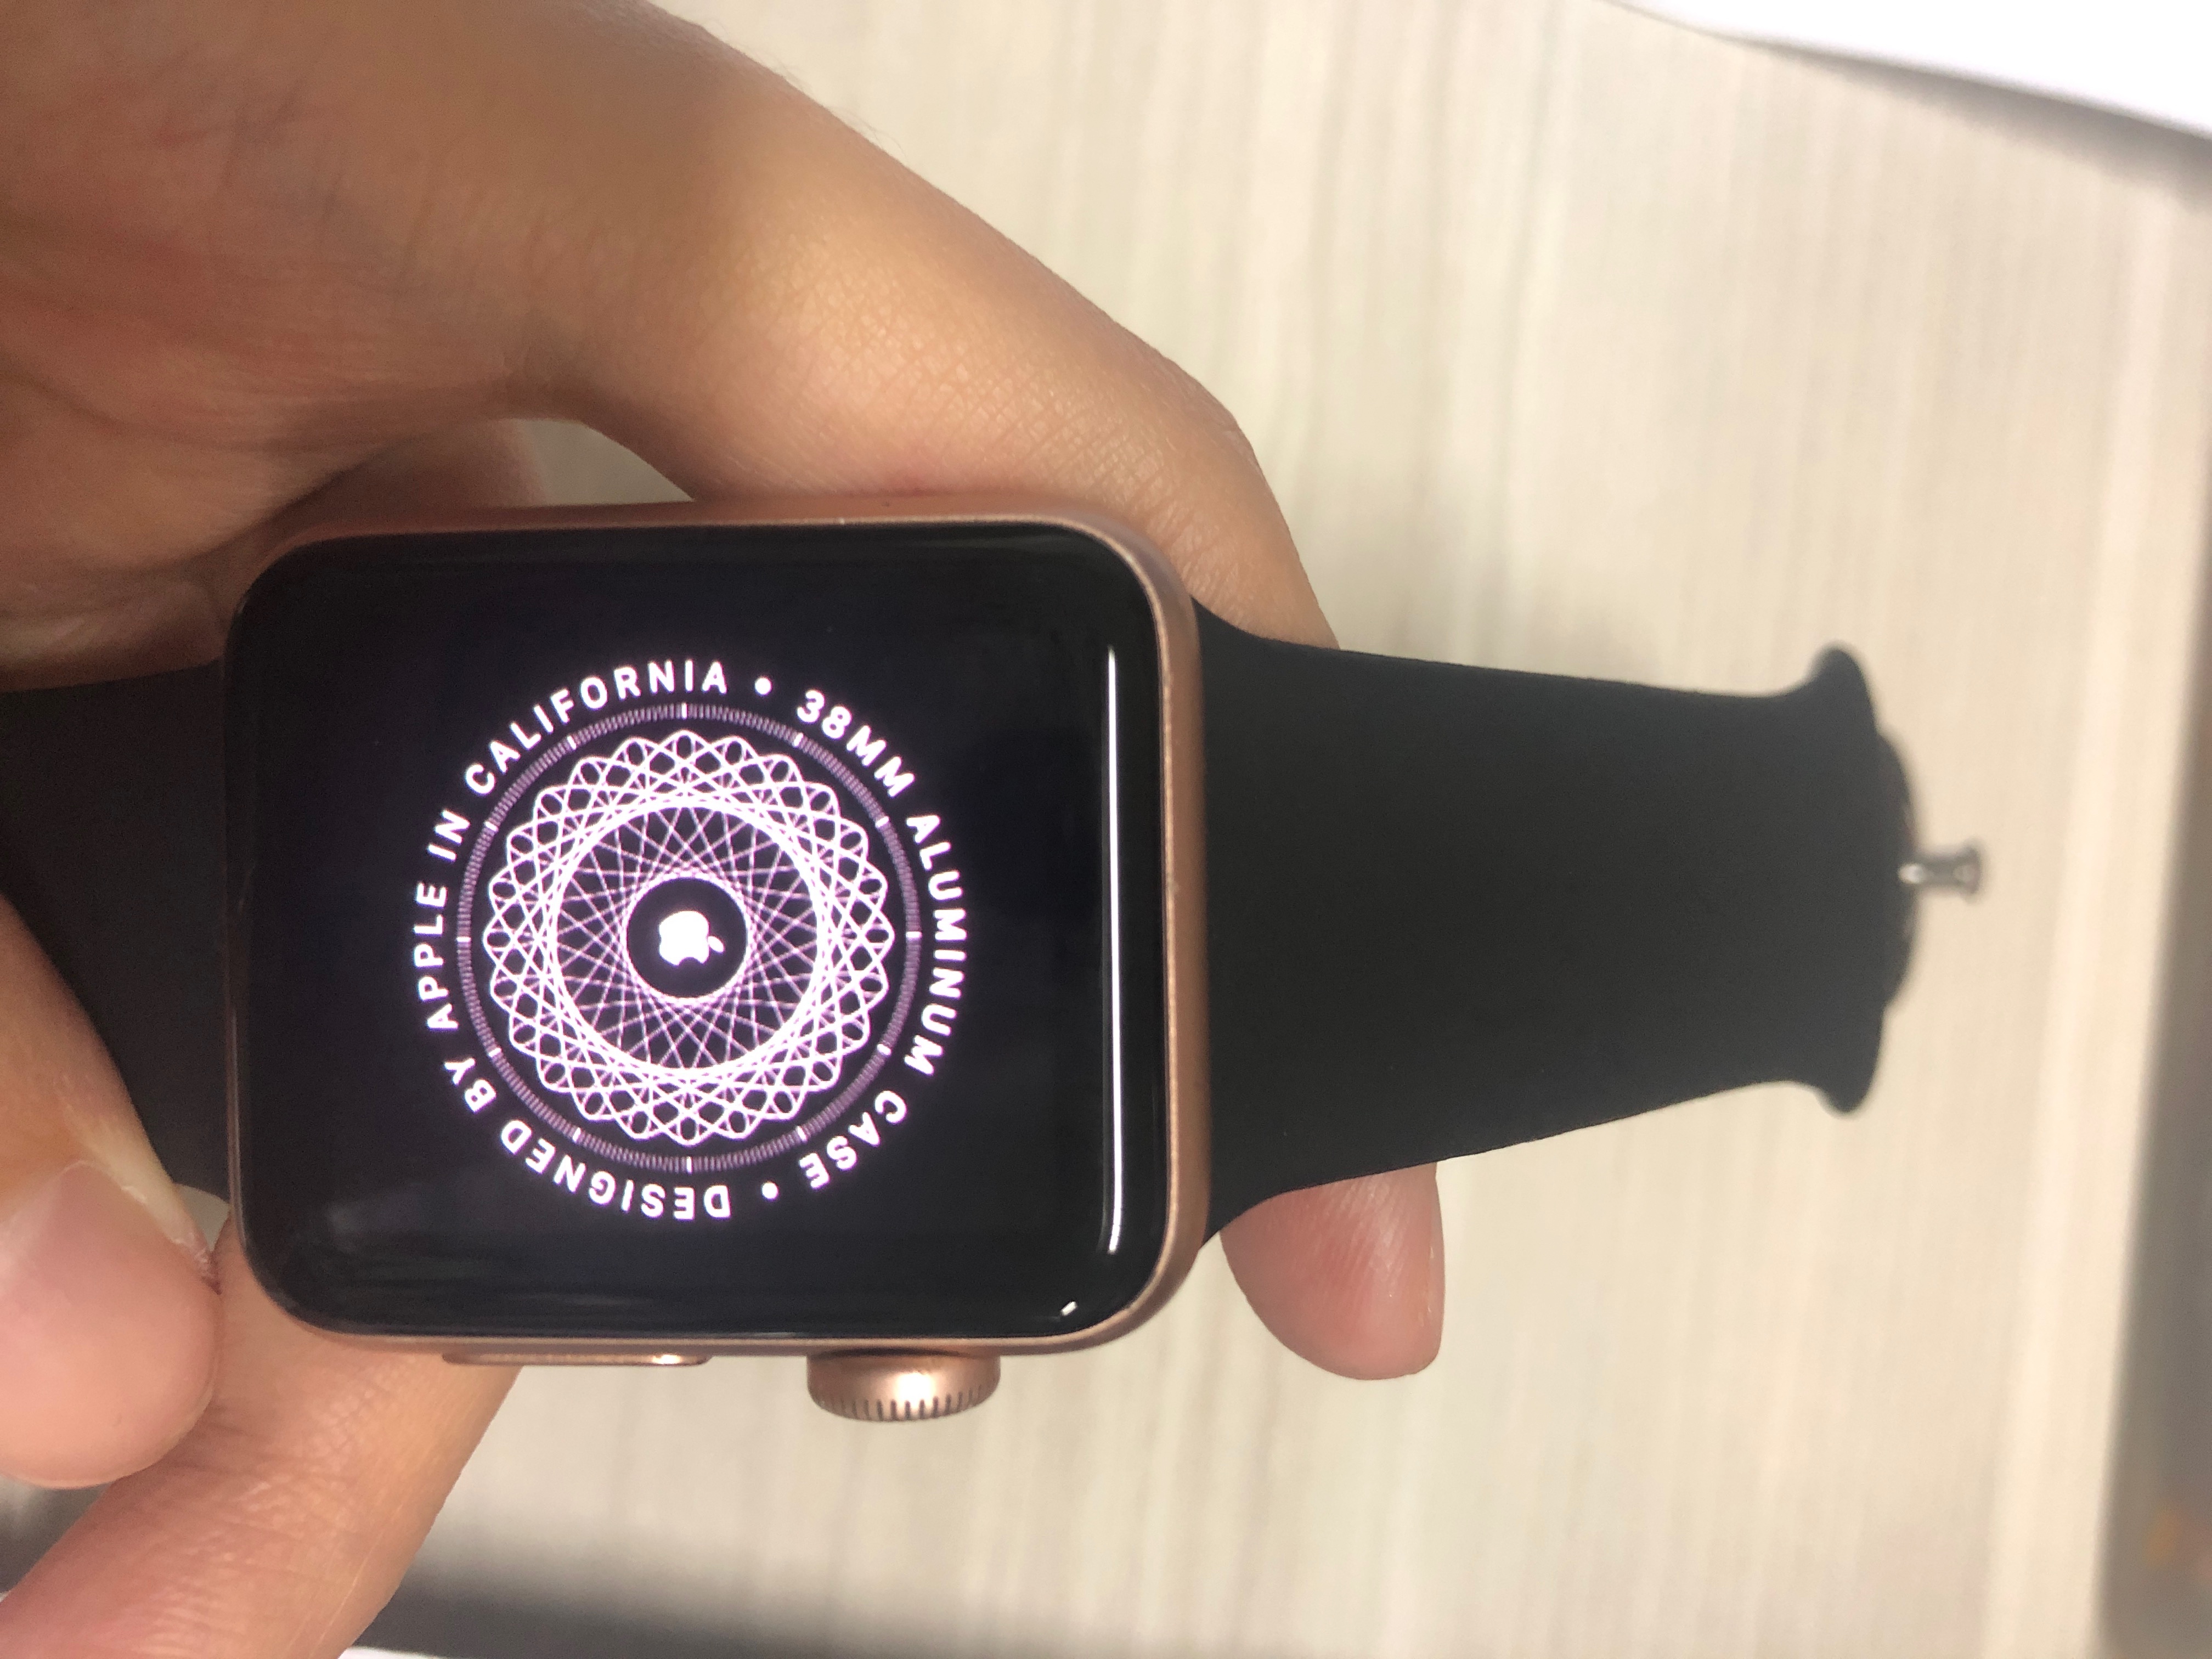 i did the hard reset on my apple watch an - Apple Community